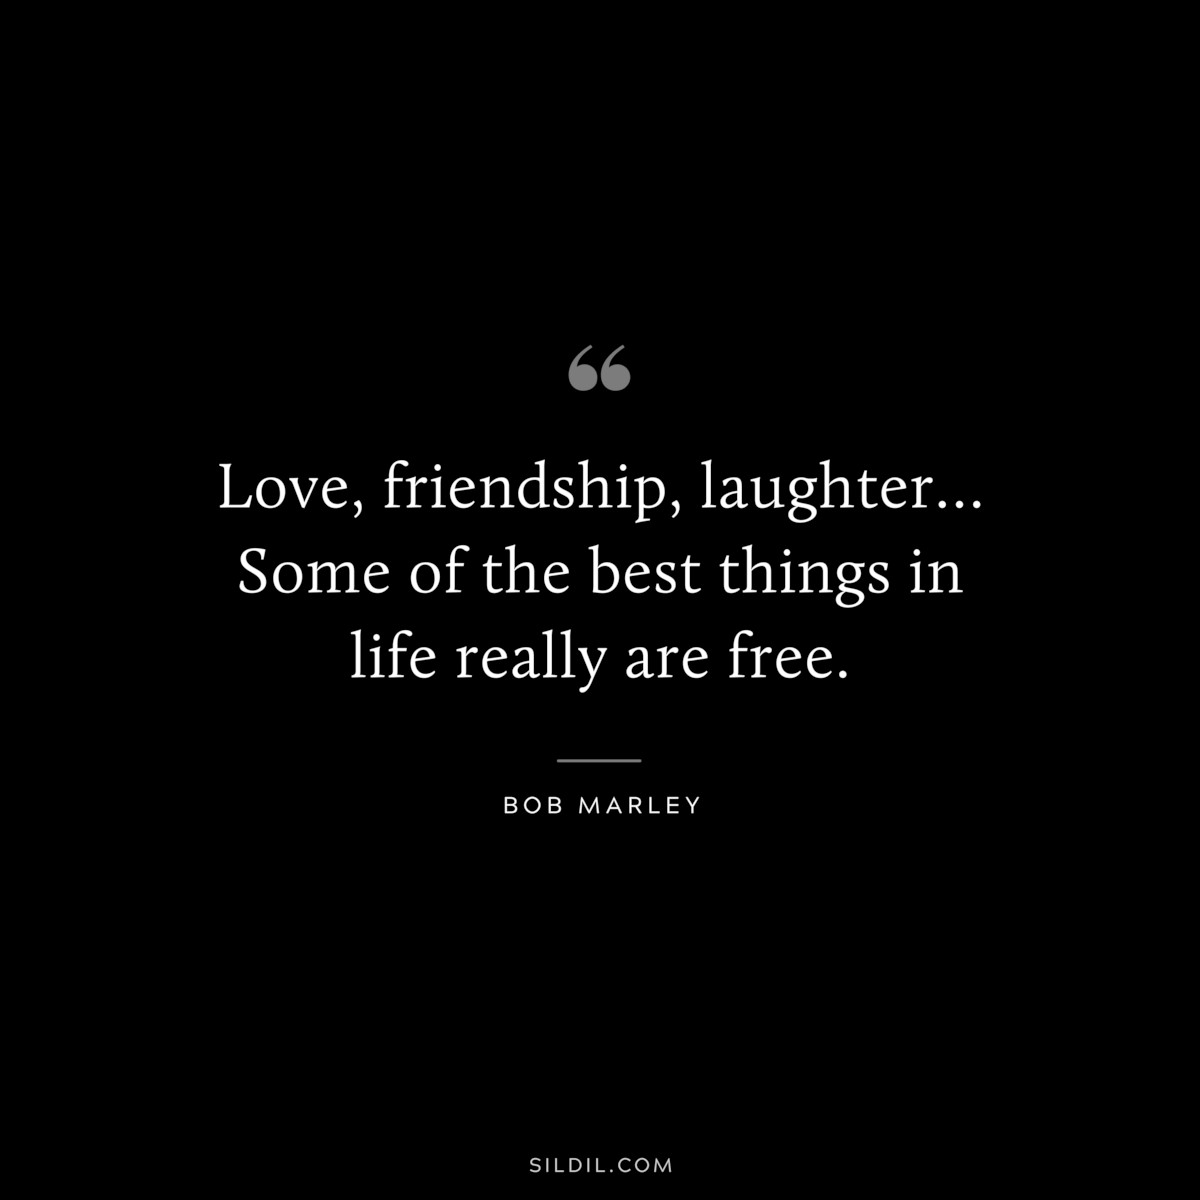 Love, friendship, laughter… Some of the best things in life really are free. ― Bob Marley